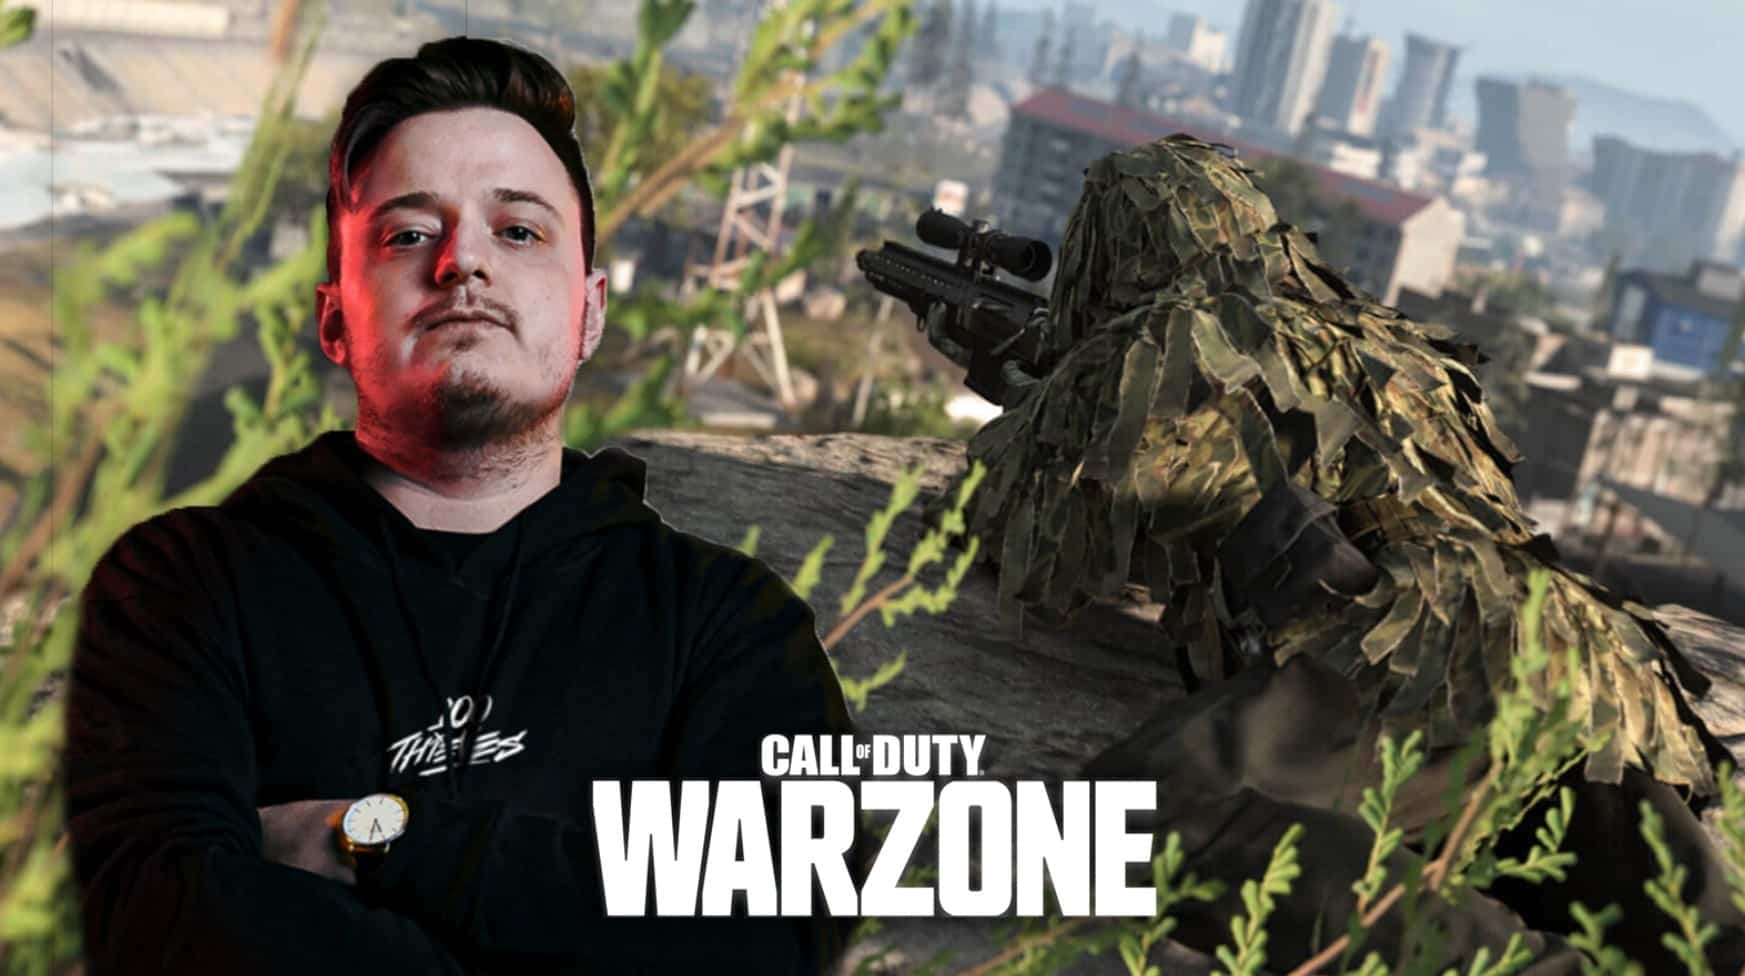 Call of Duty WARZONE Mobile: veja gameplays dos streamers do